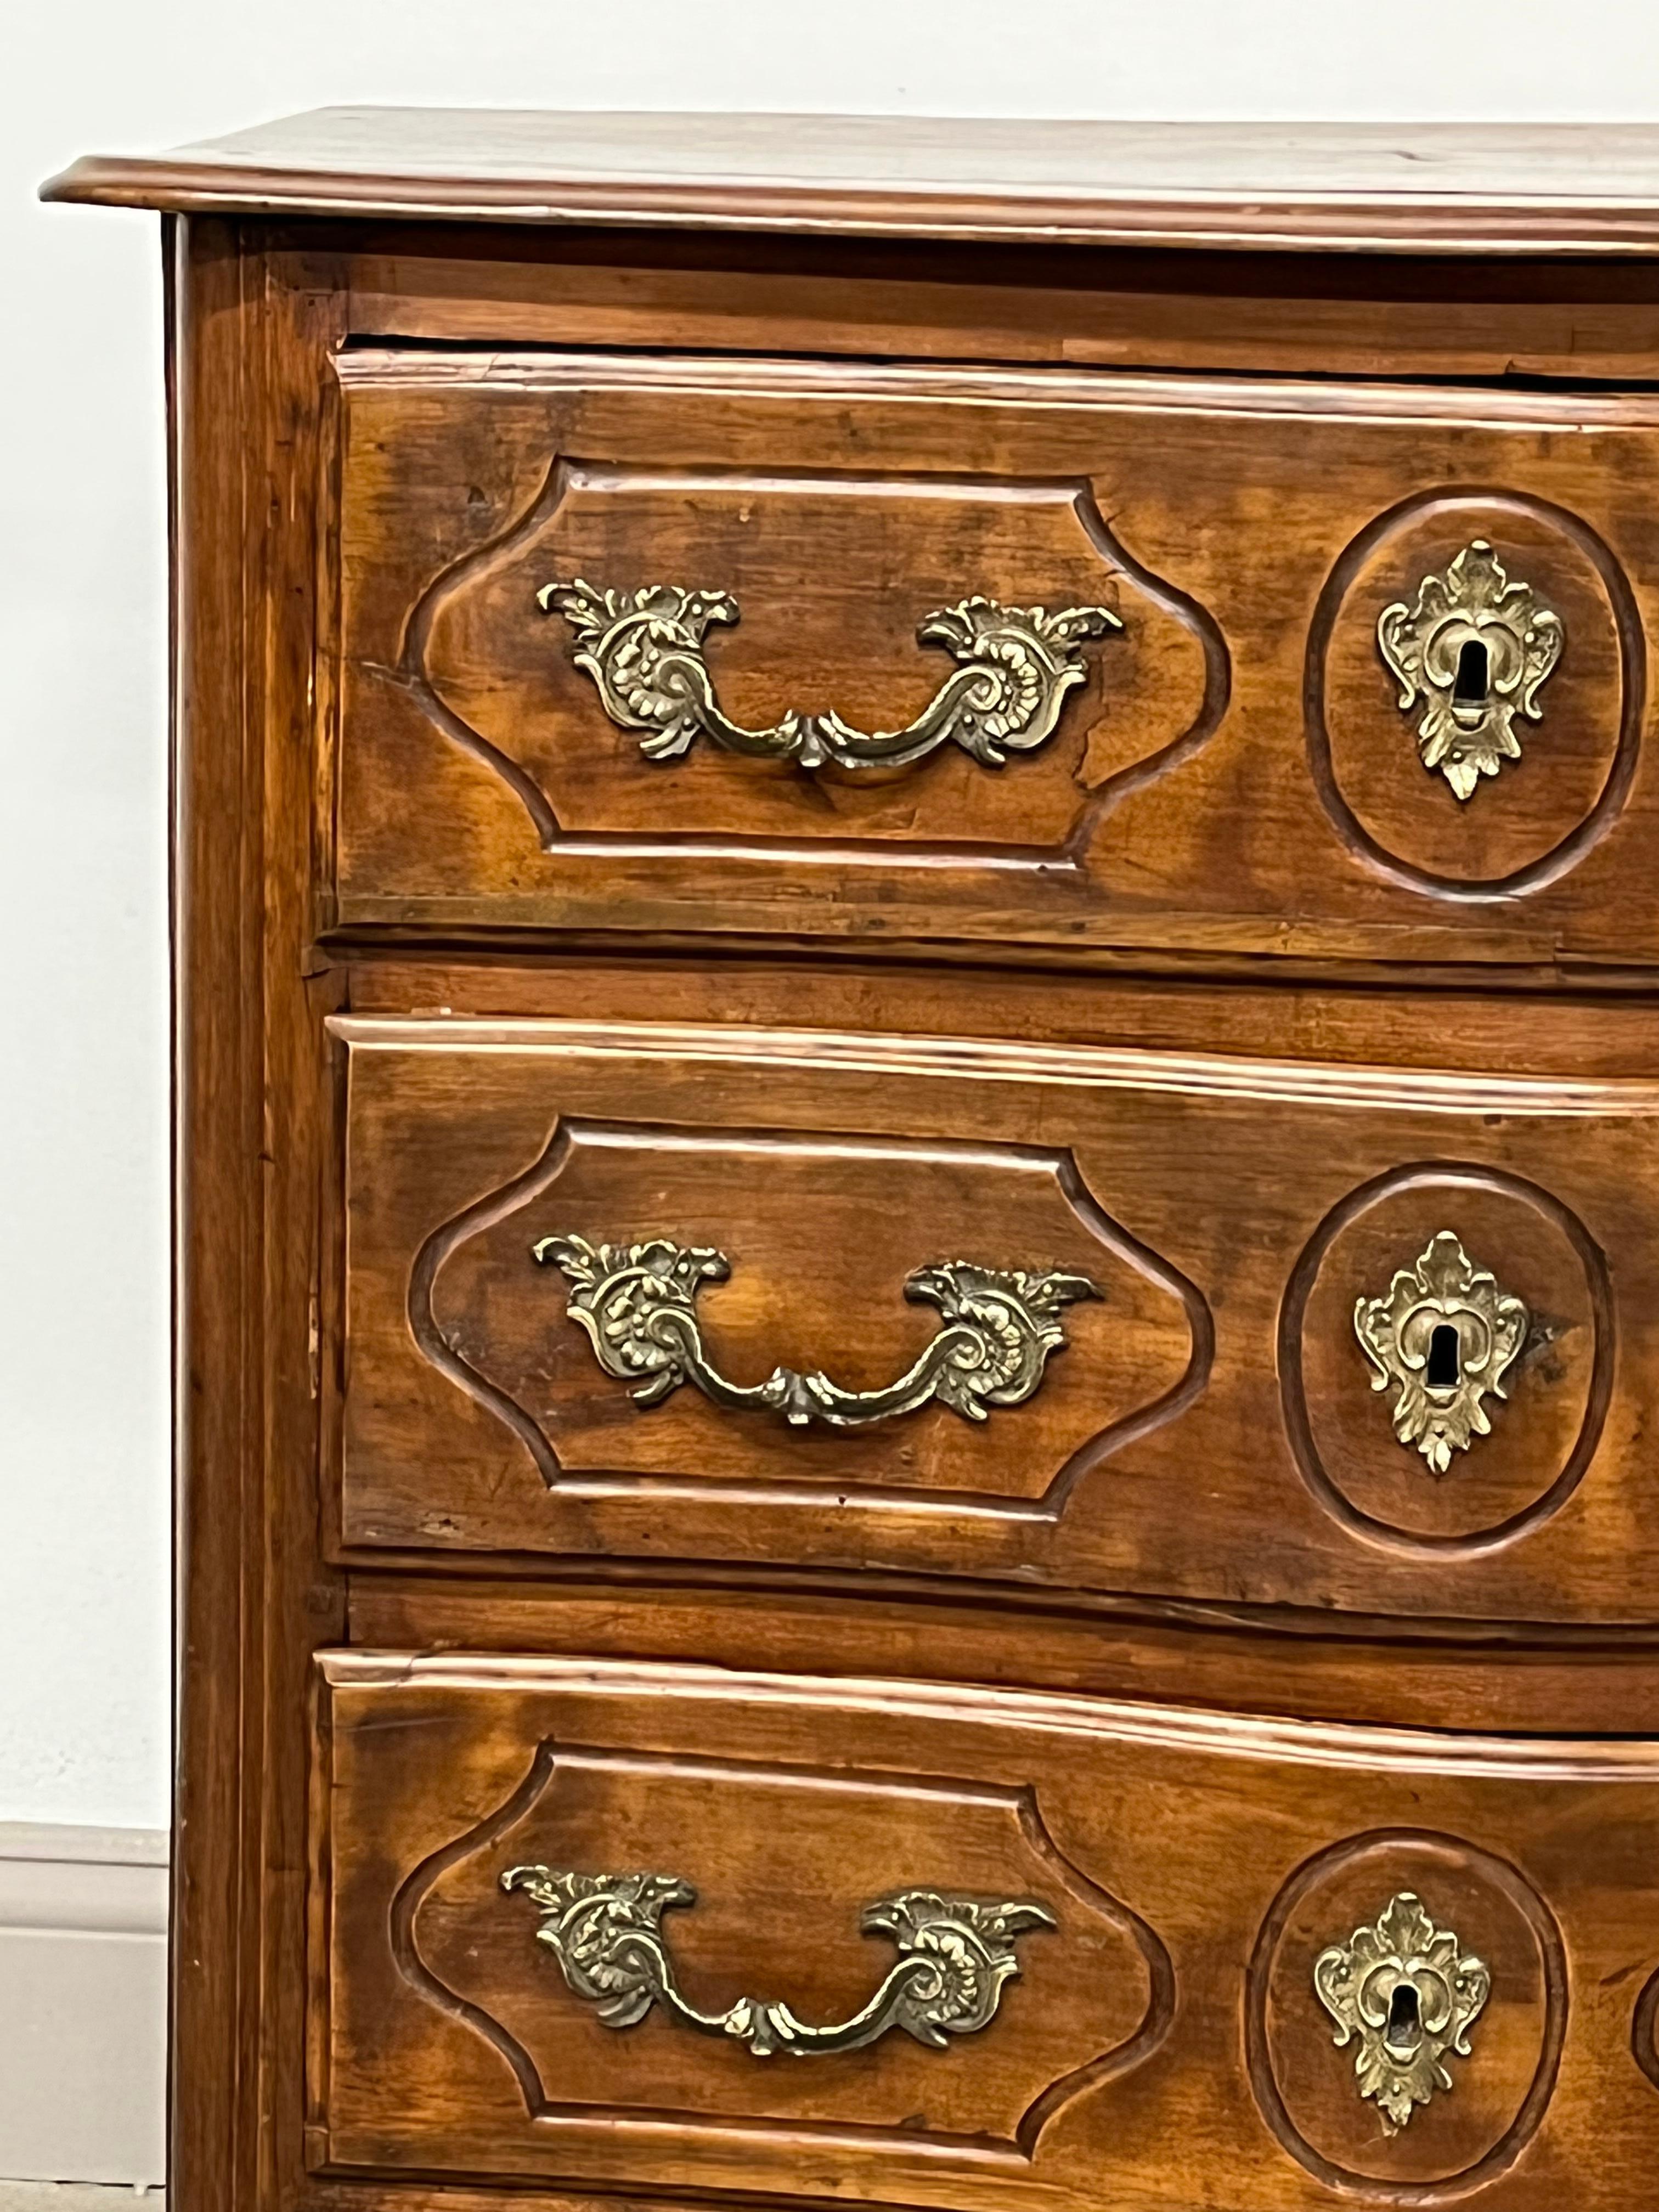 A petite Louis XV period 3-drawer commode with slightly serpentine front, the carved drawers retaining their original brass hardware, with a conforming wood top and simple straight legs. An unusual small size, popular today as a bedside cabinet.